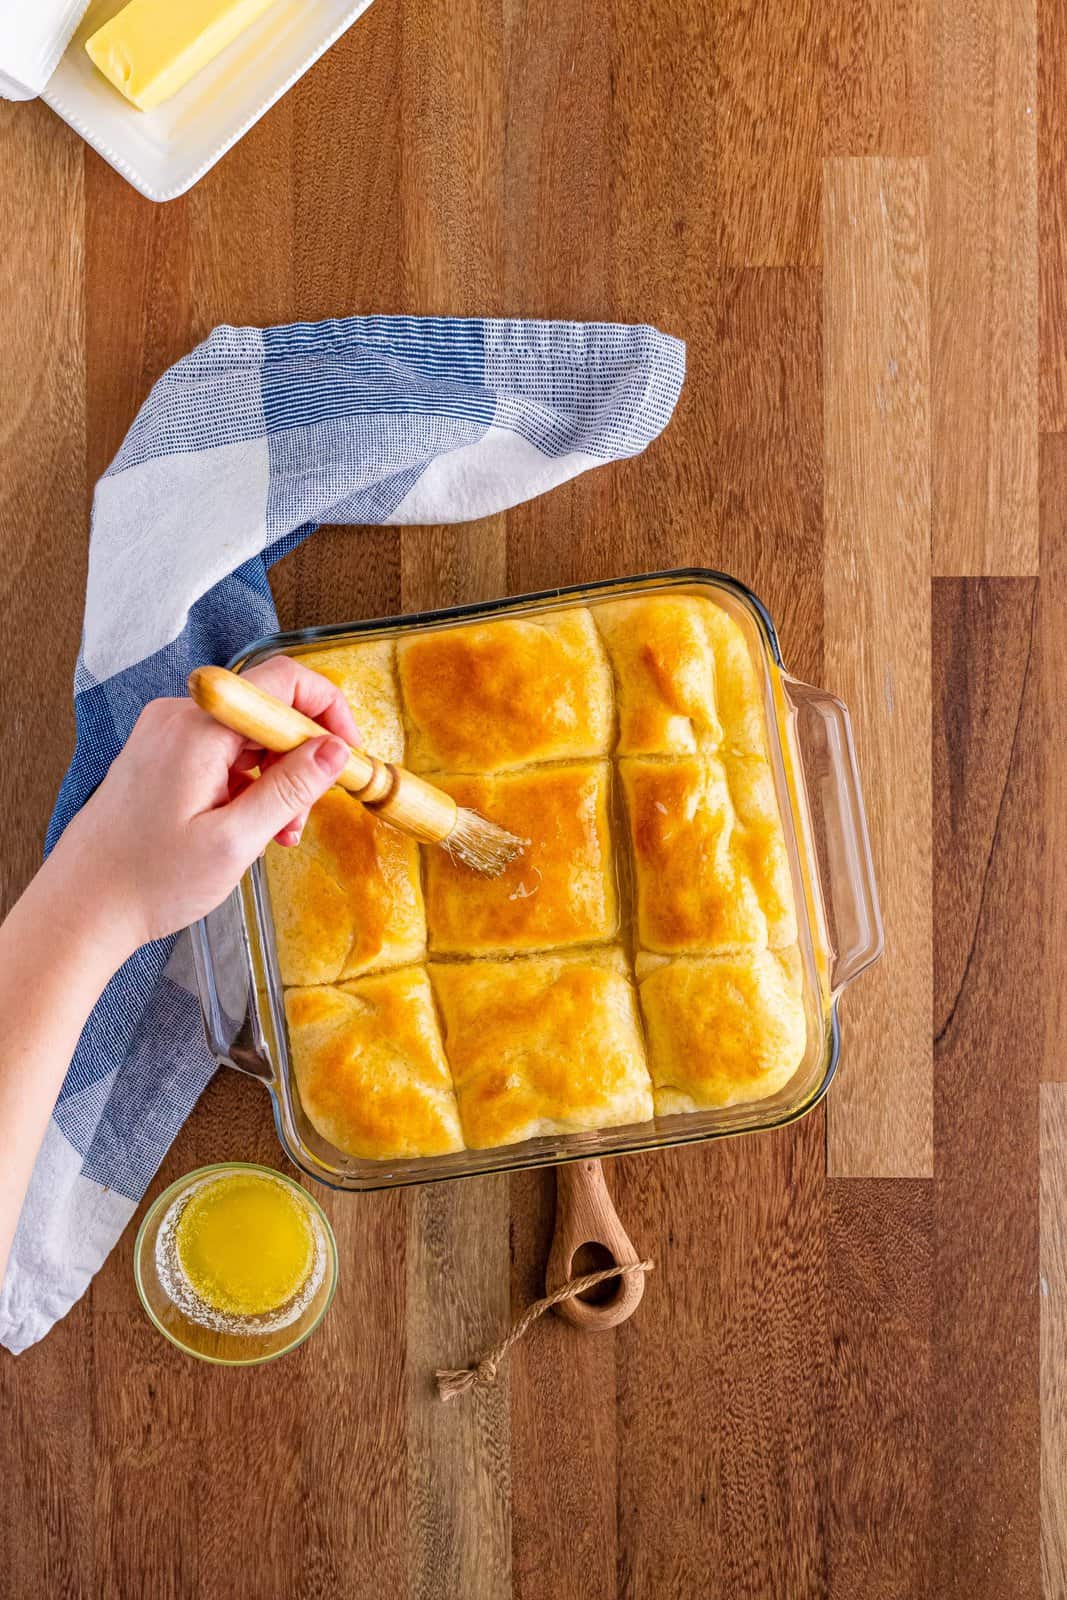 A baking dish with fresh, hot butter dip yeast rolls with a brush brushing more butter.